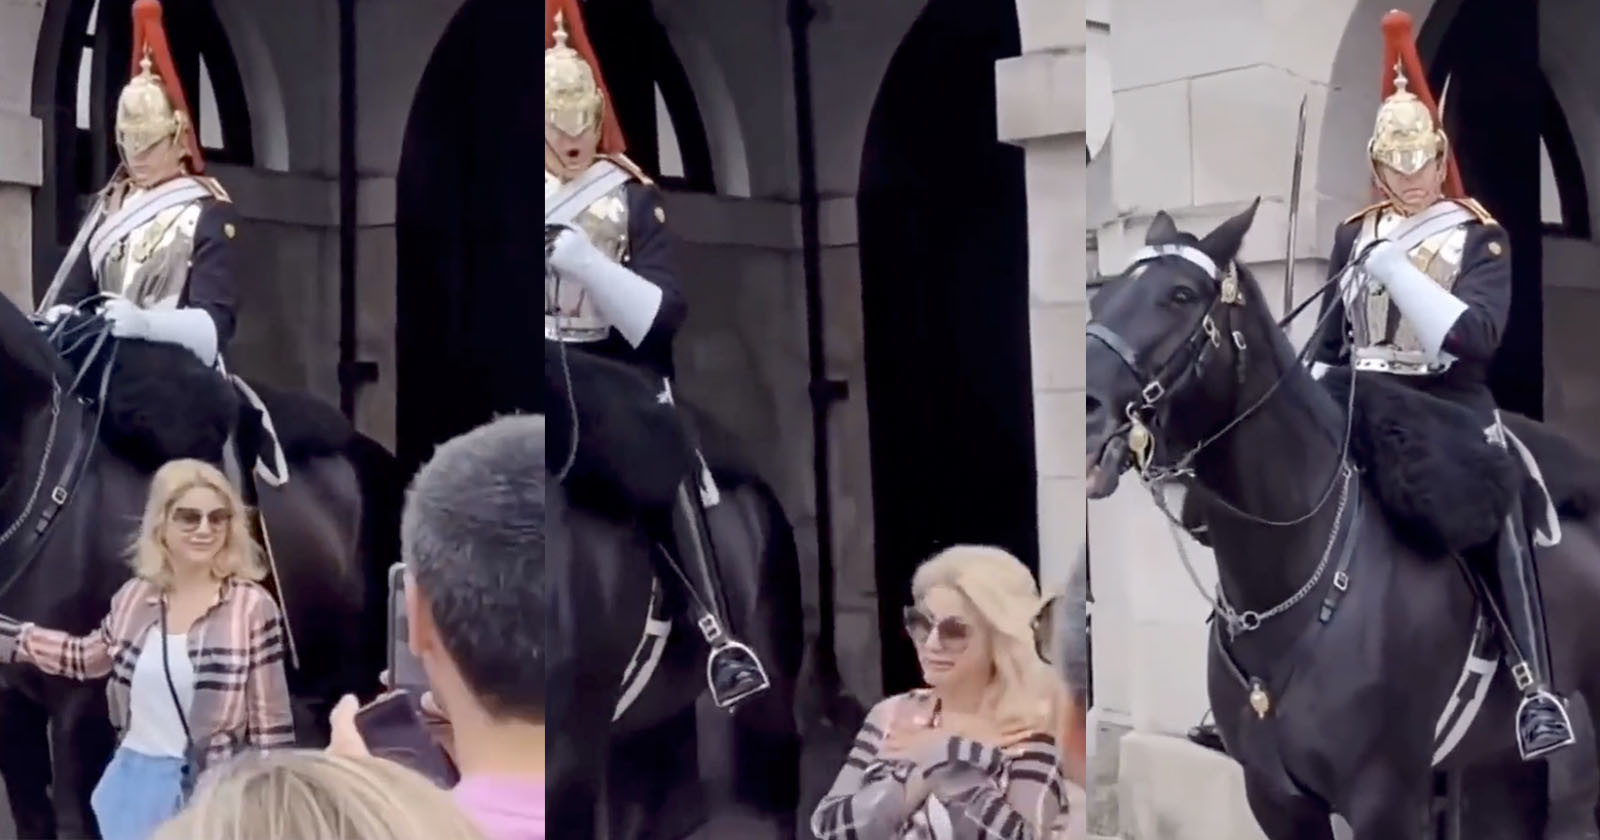 Queens Guard Screams at Woman Posing for Photo